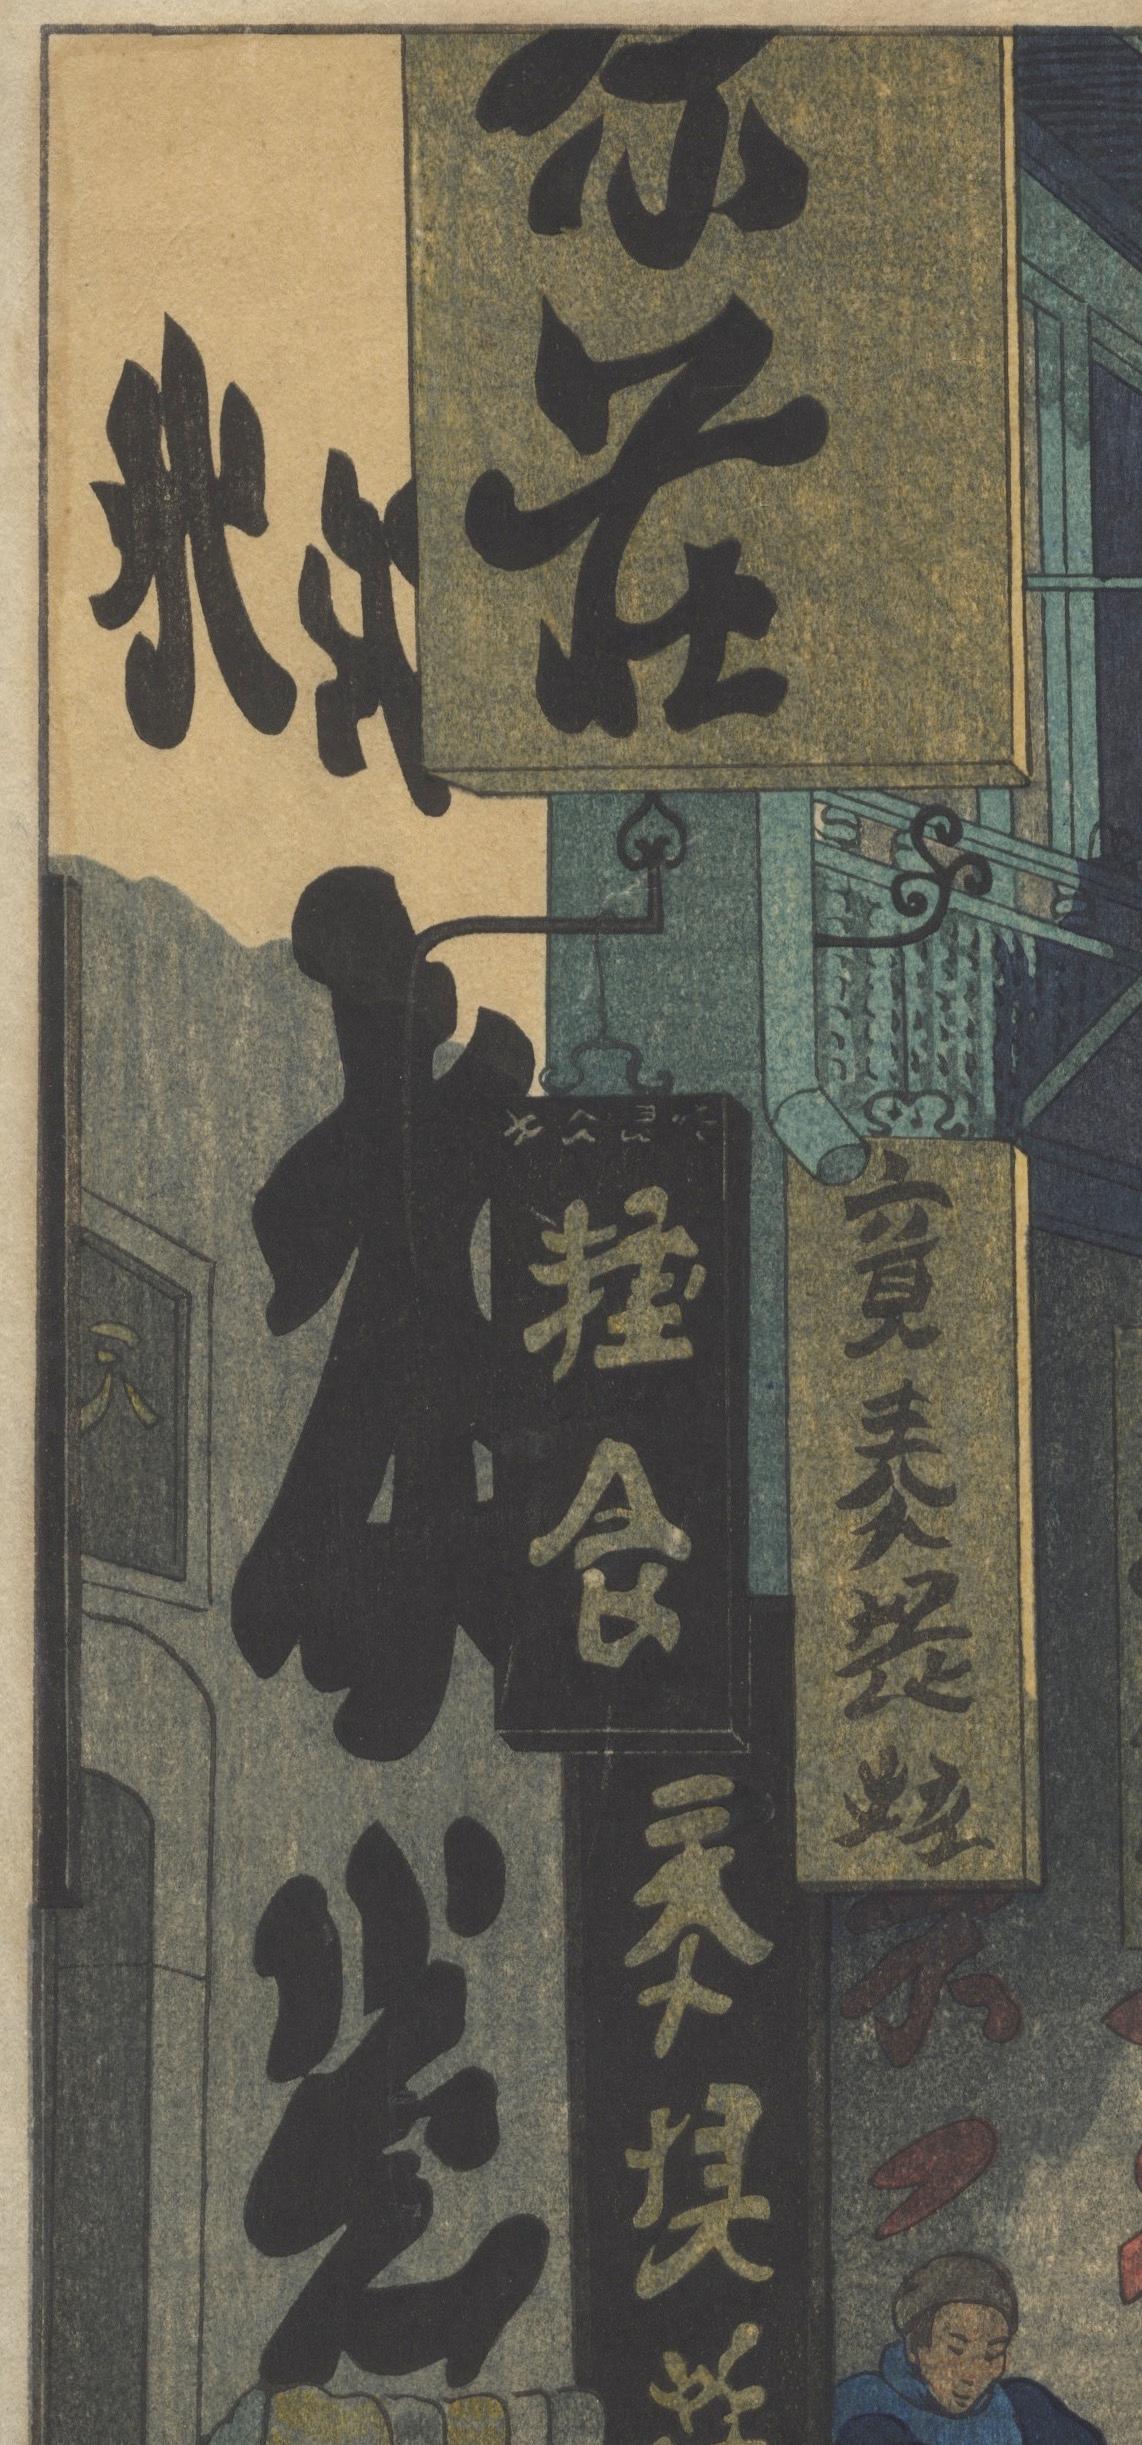 Artist: Elizabeth Keith (1887-1956)
Title: Street Scene, Soochow in Kiangsu
Publisher: Watanabe Shozaburo
Date: 1924
Size: 39.5 x 27.4 cm
Condition report: Minor creases and stains, light discolouration on the margins, pinhole at the top. 
Original